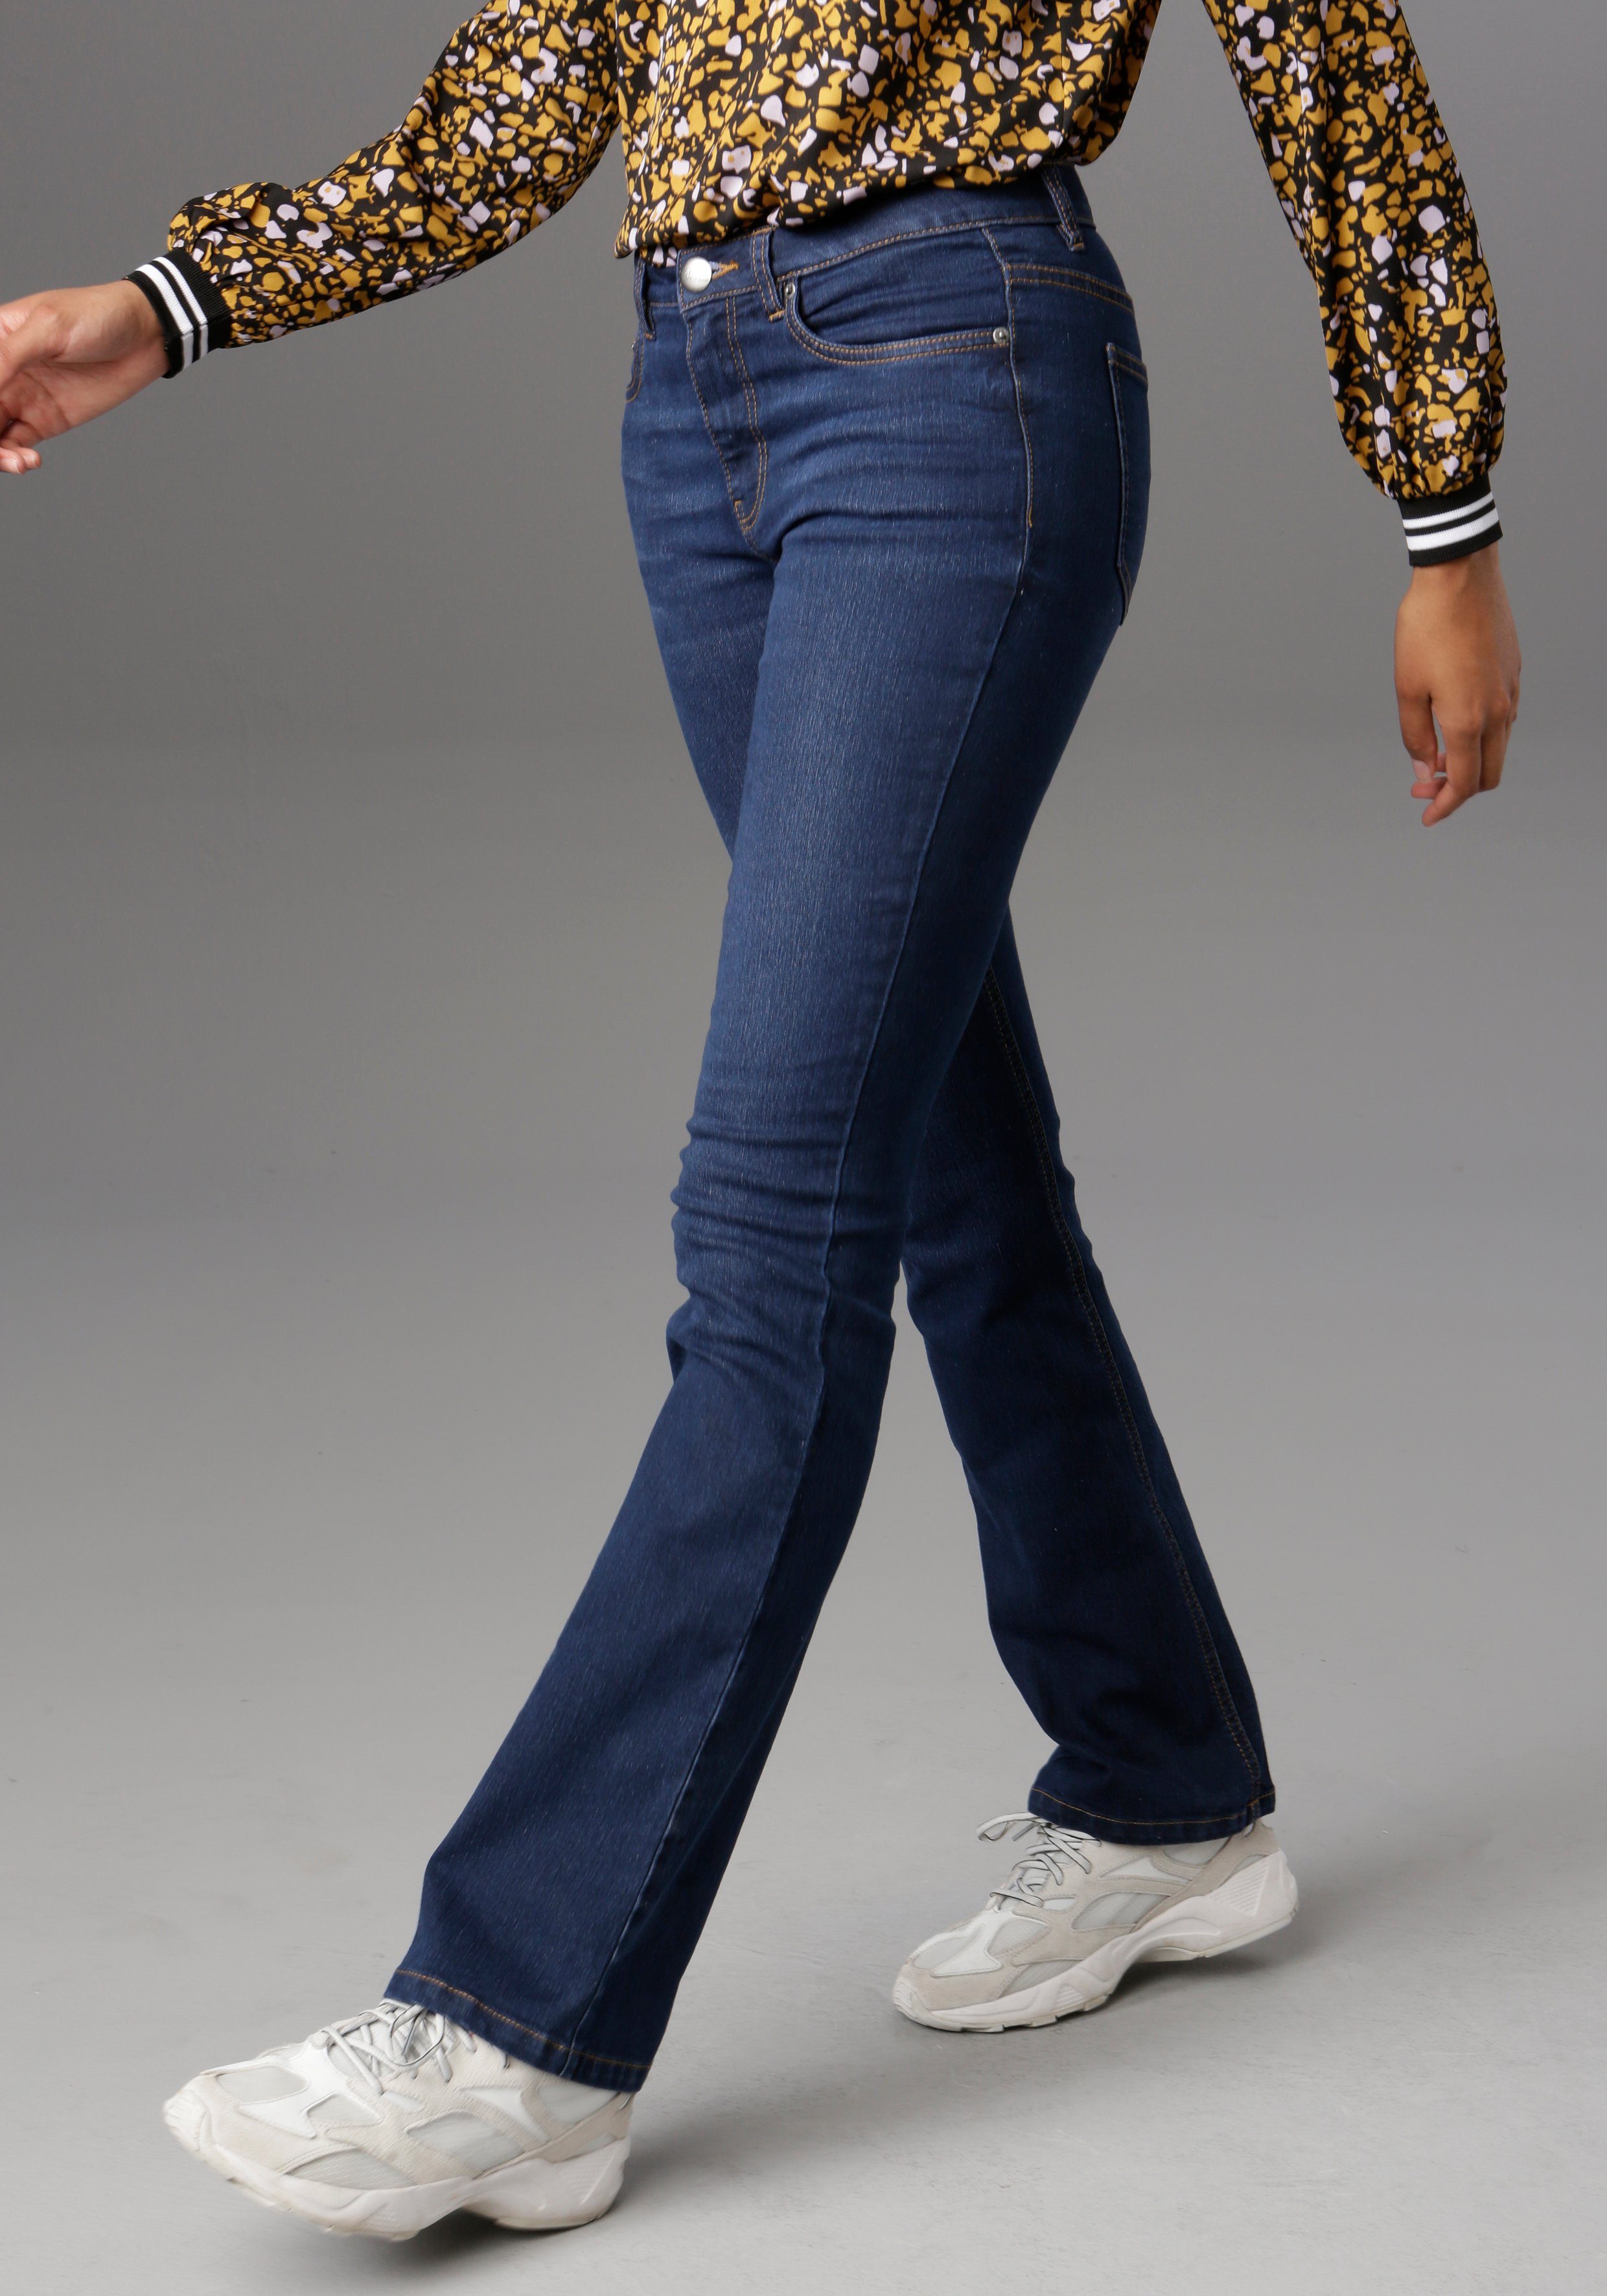 Mode Spijkerbroeken Hoge taille jeans MNG Hoge taille jeans wit casual uitstraling 